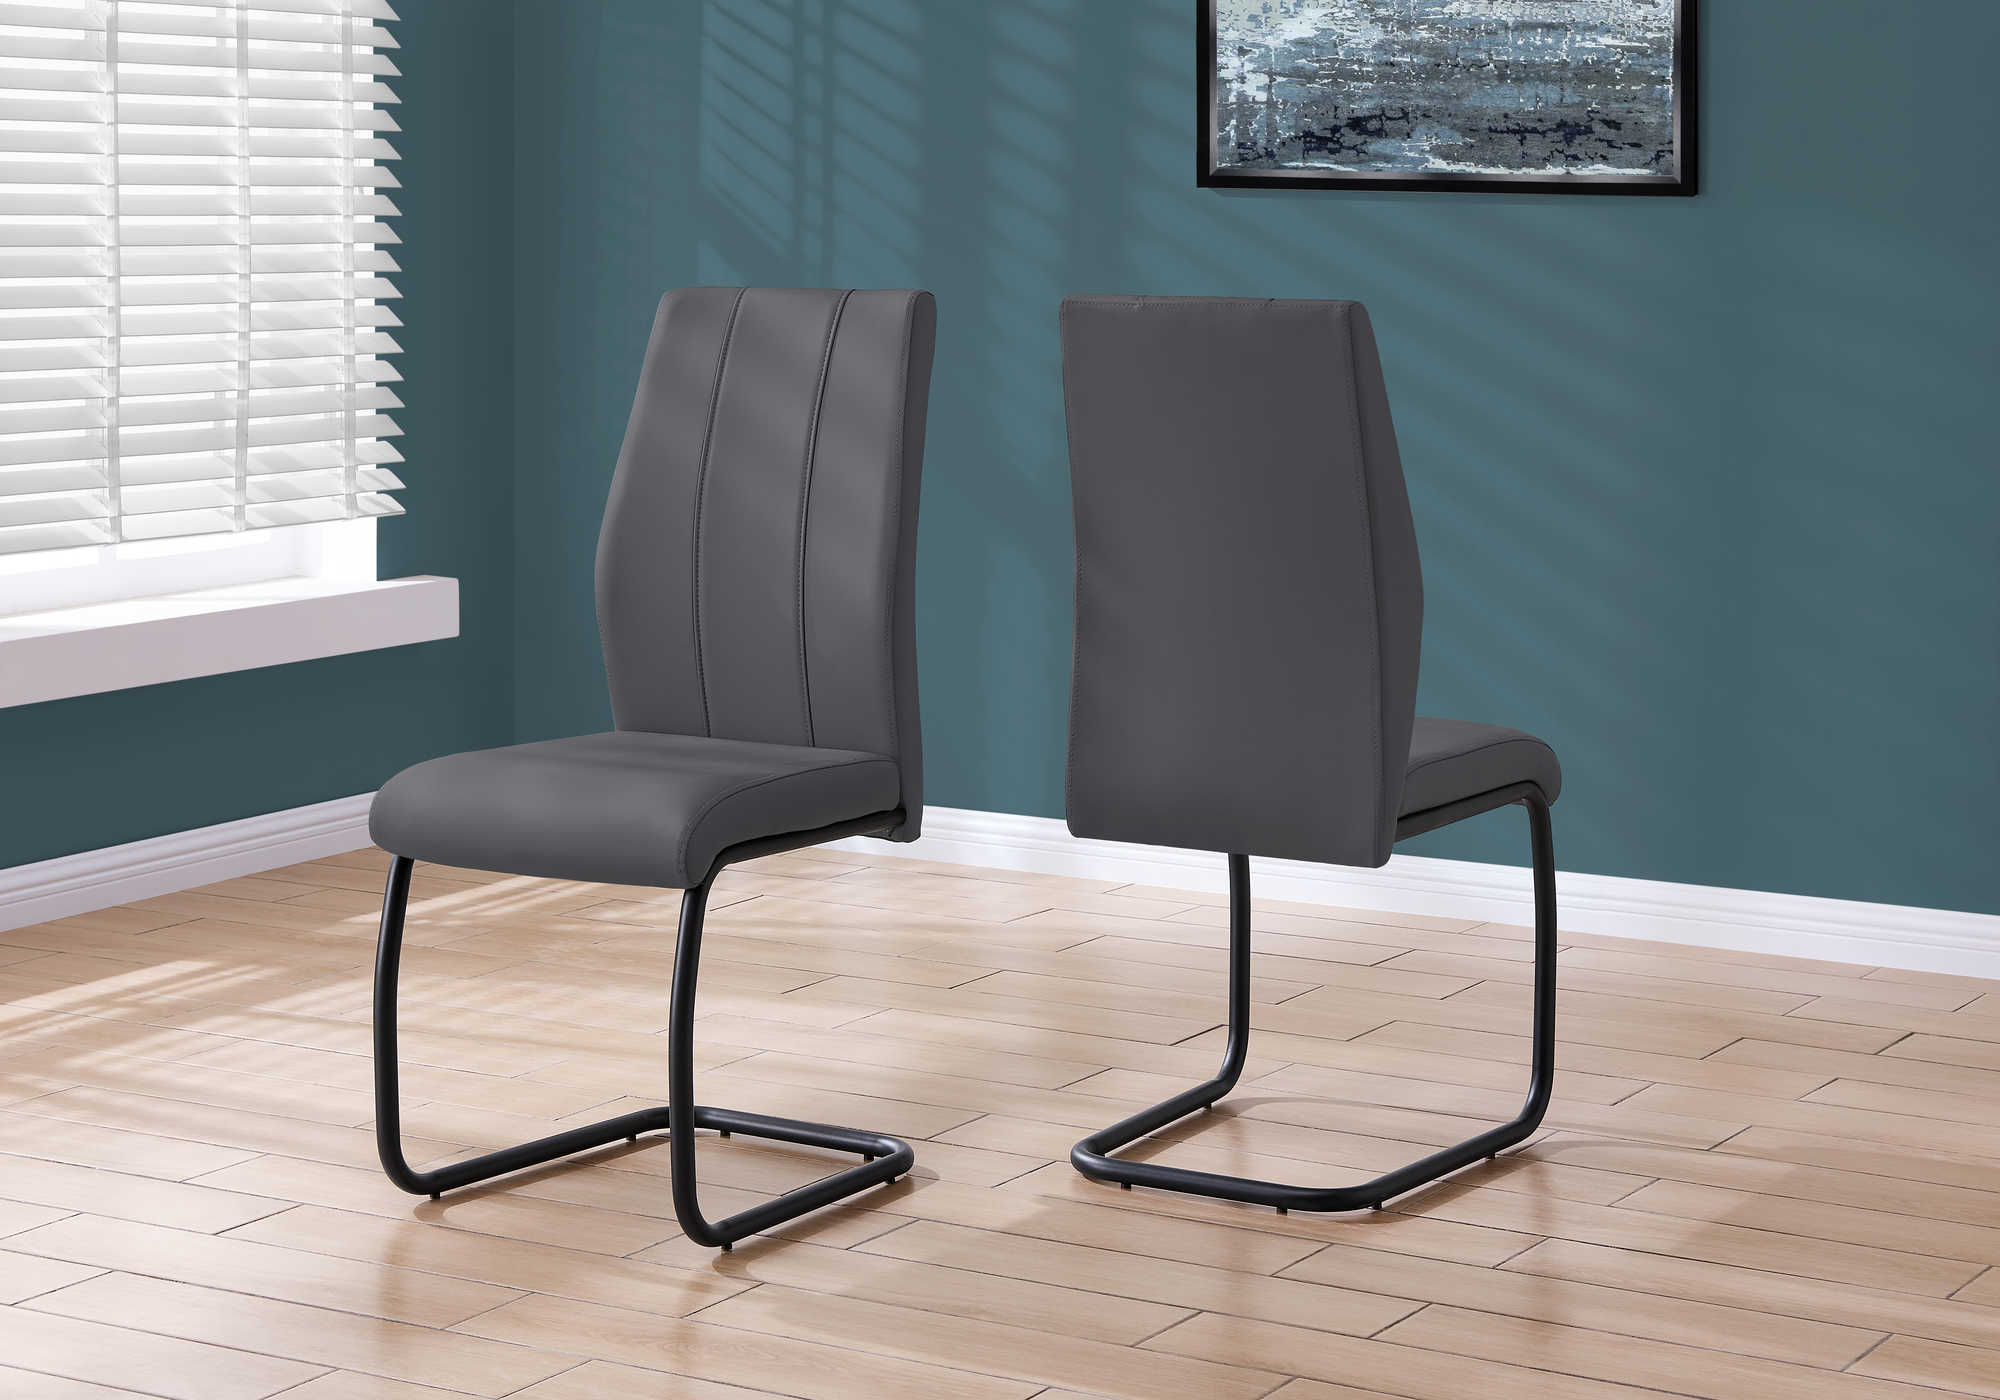 DINING CHAIR - 2PCS / 39"H / GREY LEATHER-LOOK / METAL